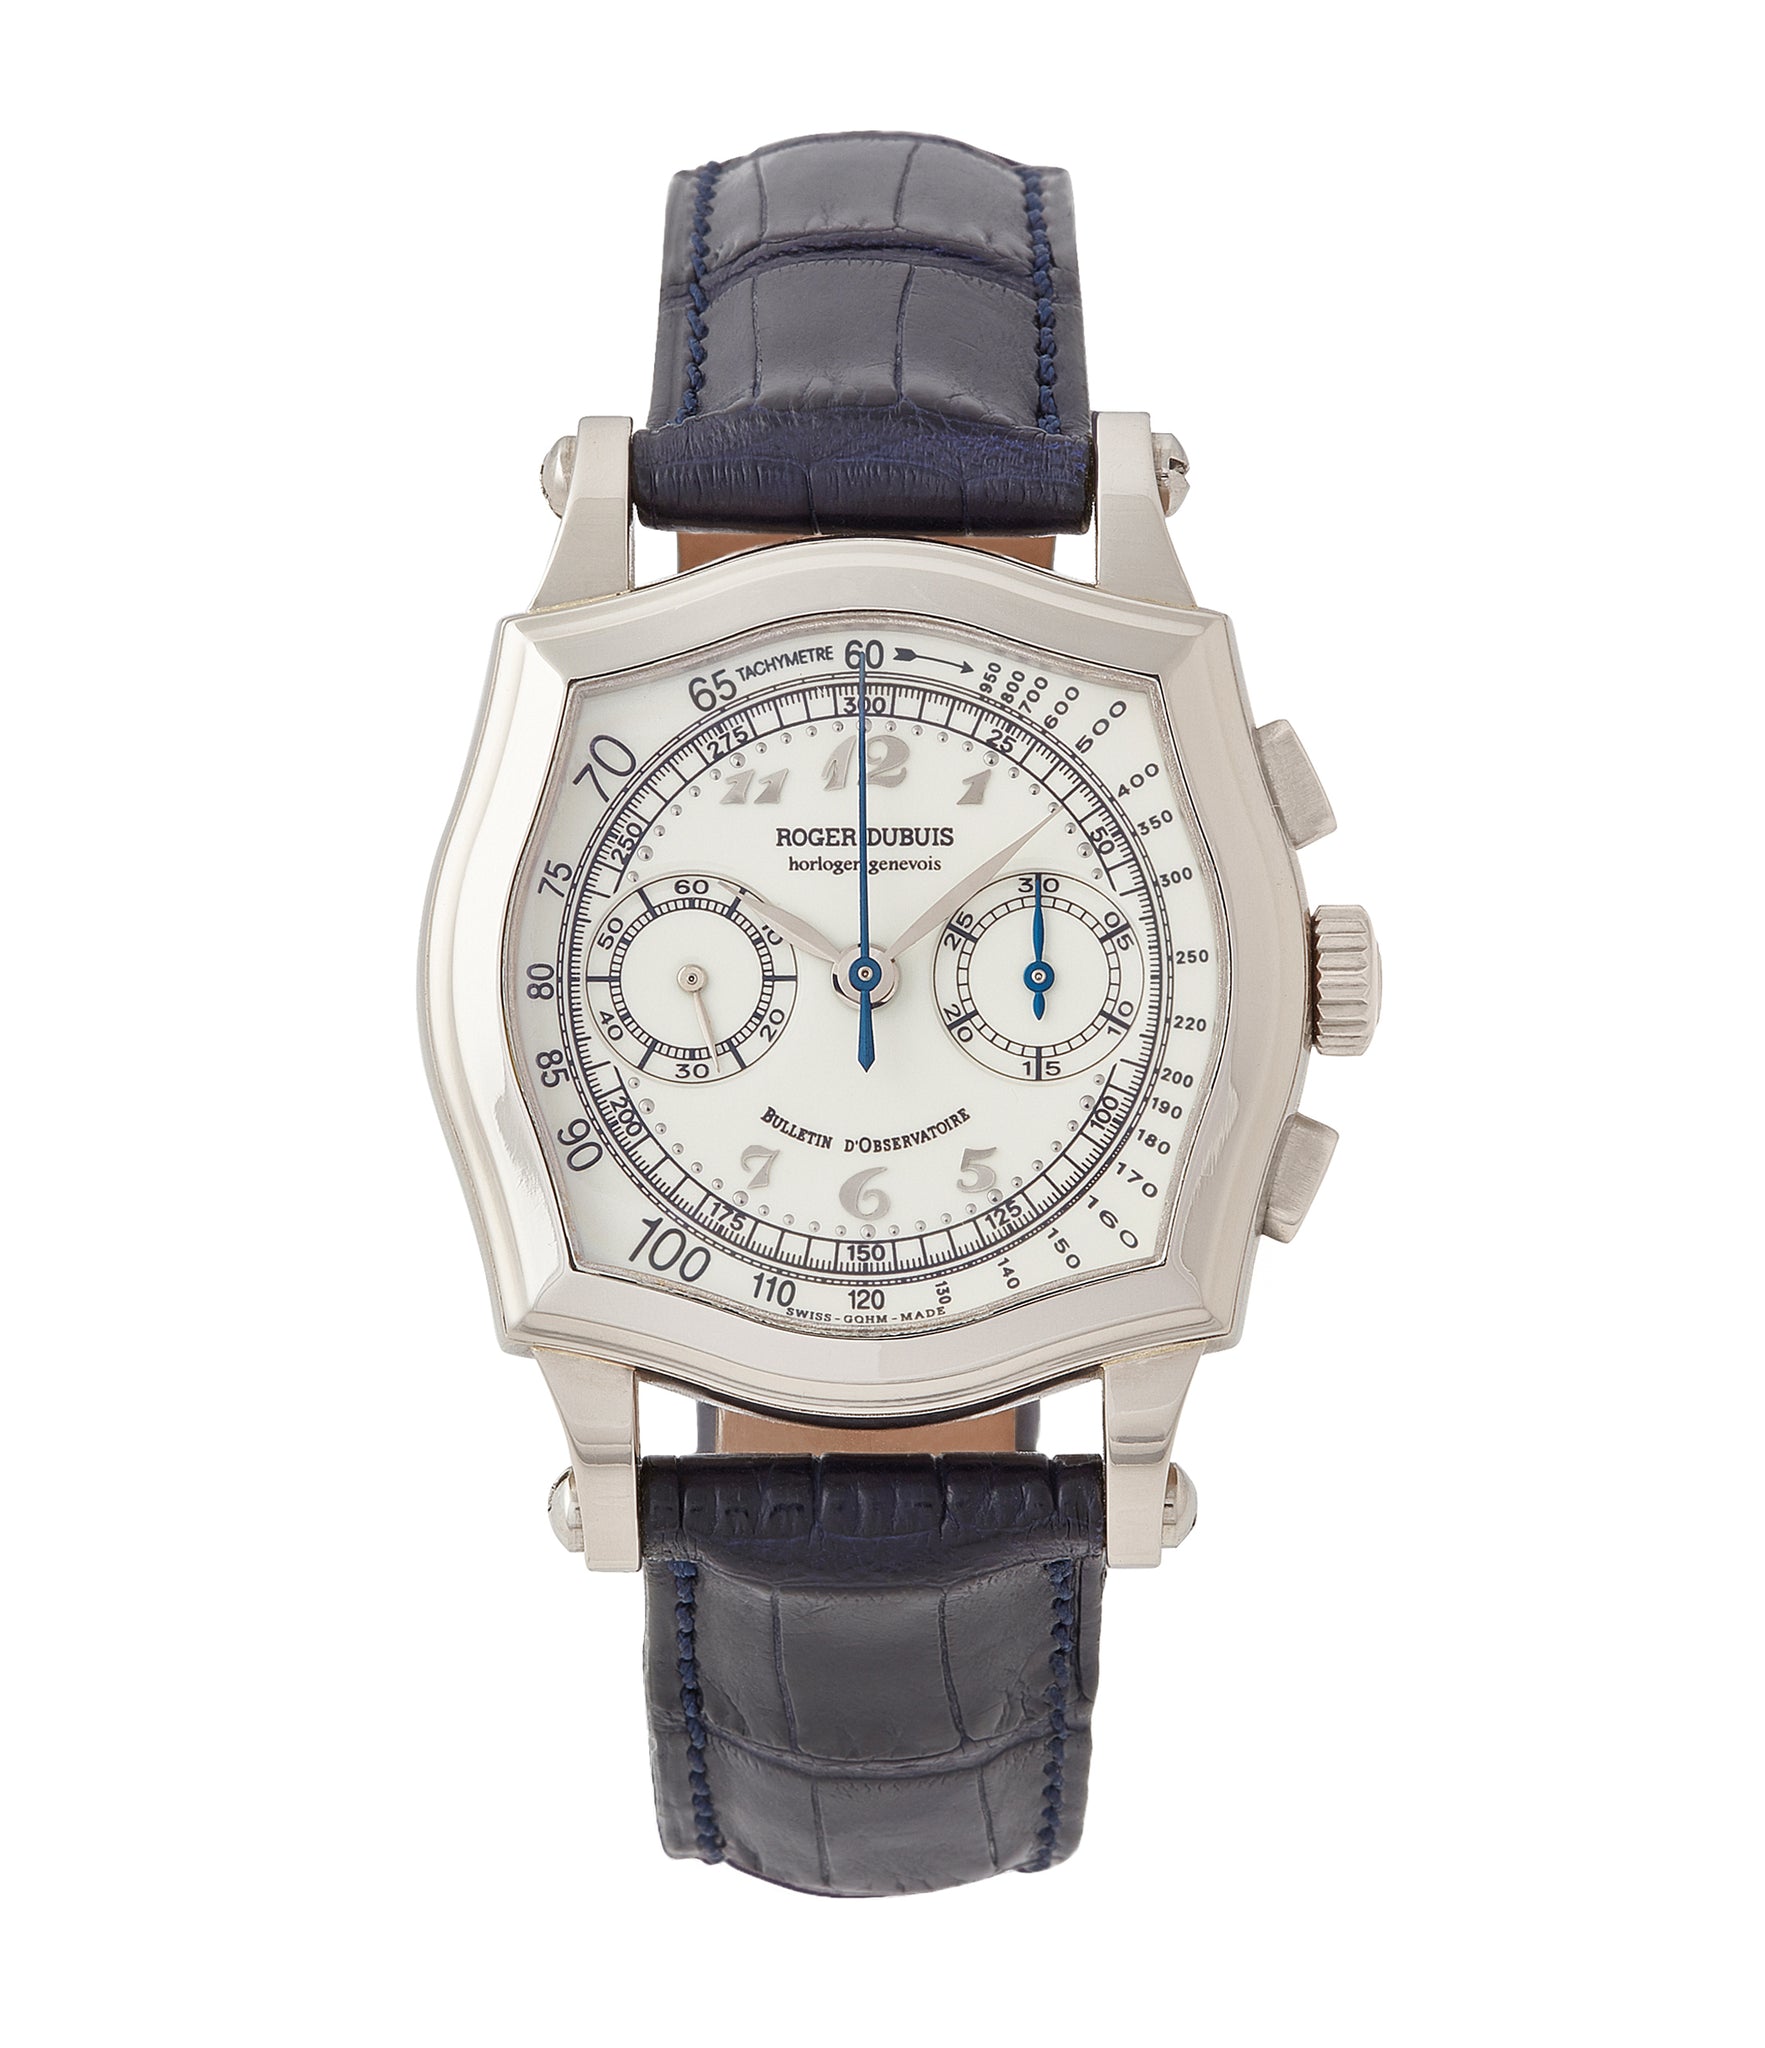 buy Roger Dubuis Sympathie Chronograph S37 Limited Edition white gold dress watch from independent watchmaker for sale online at A Collected Man London UK specialist of rare watches